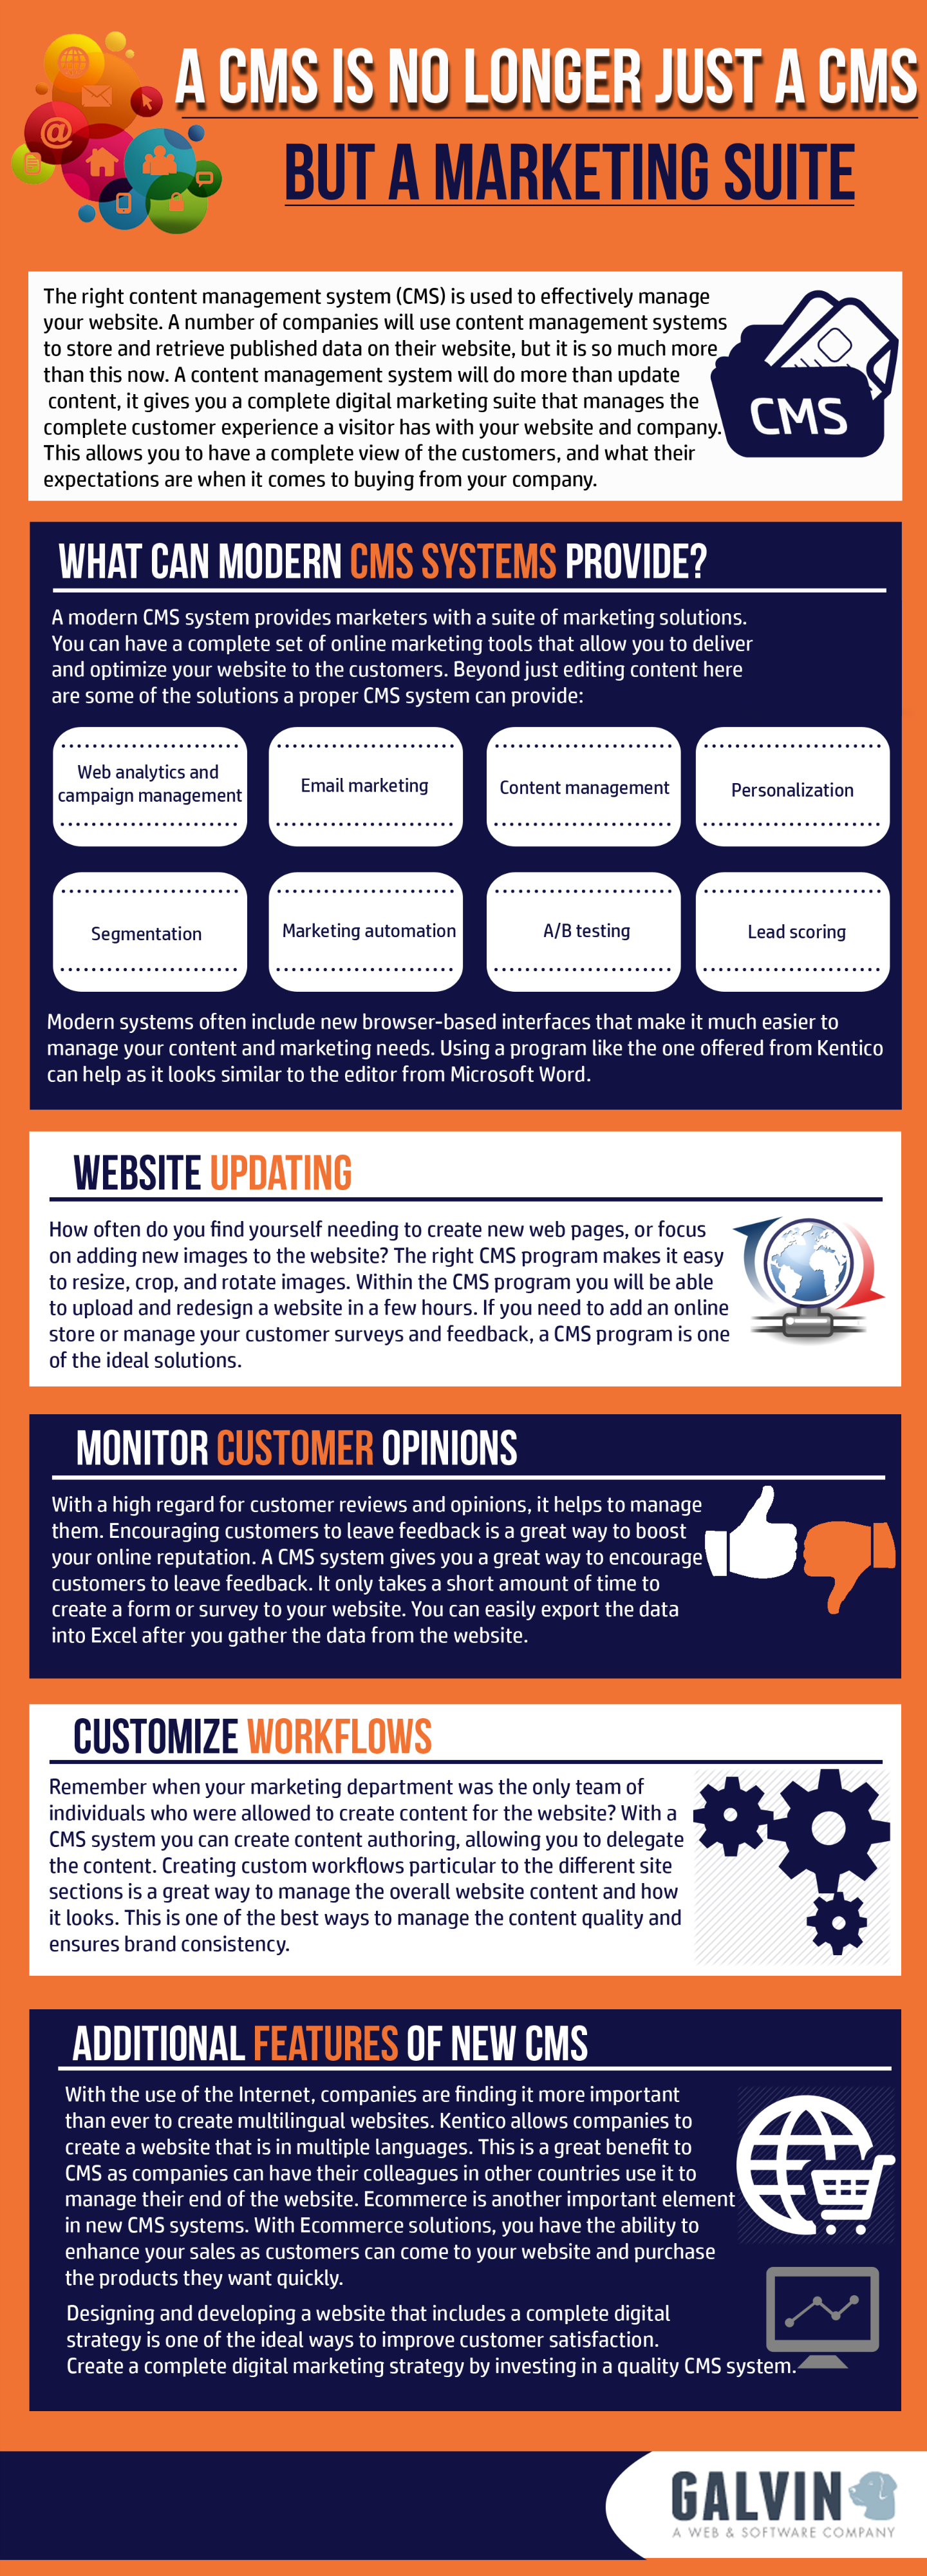 CMS Marketing Suite Infographic